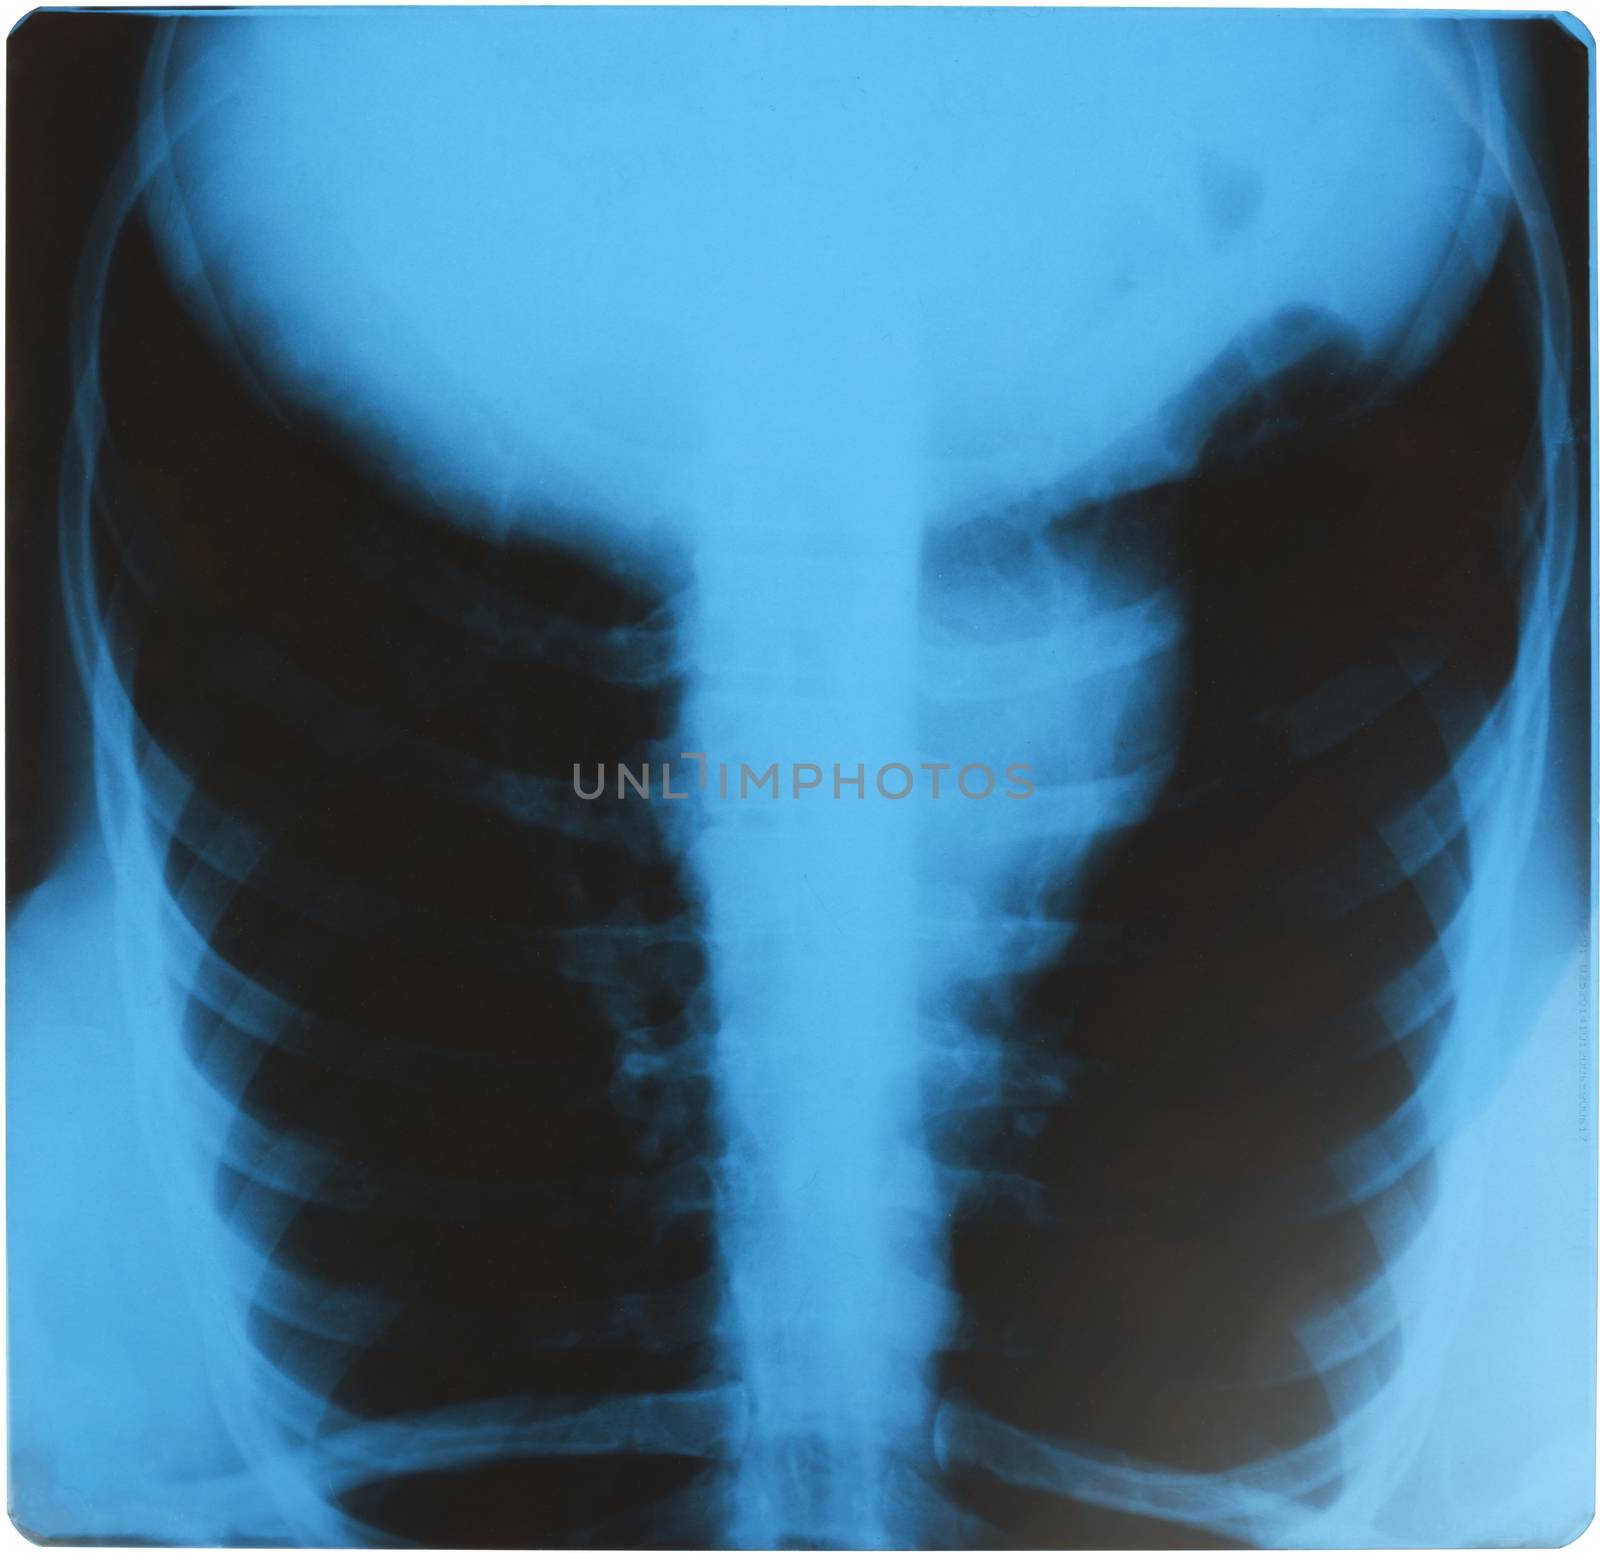 X-ray examination of human chest on picture